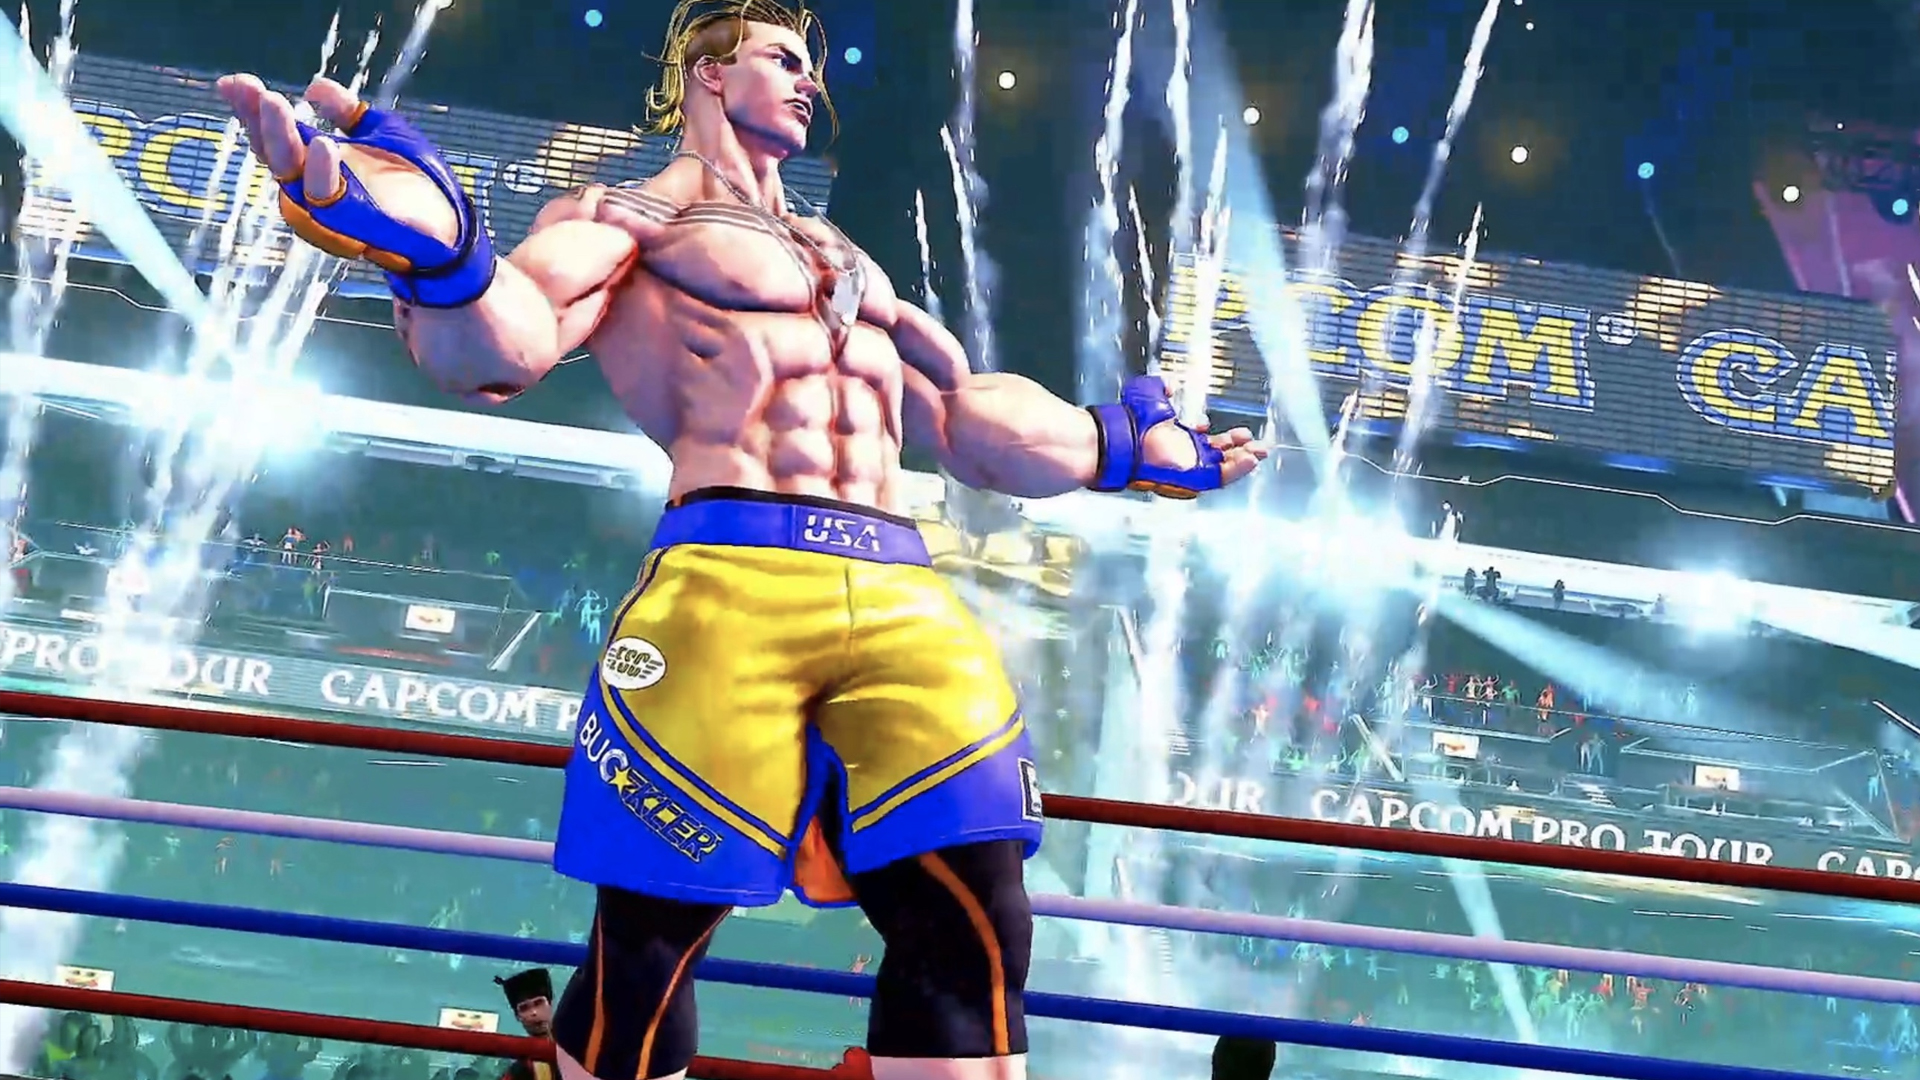 Street Fighter V’s final character Luke is a to the franchise